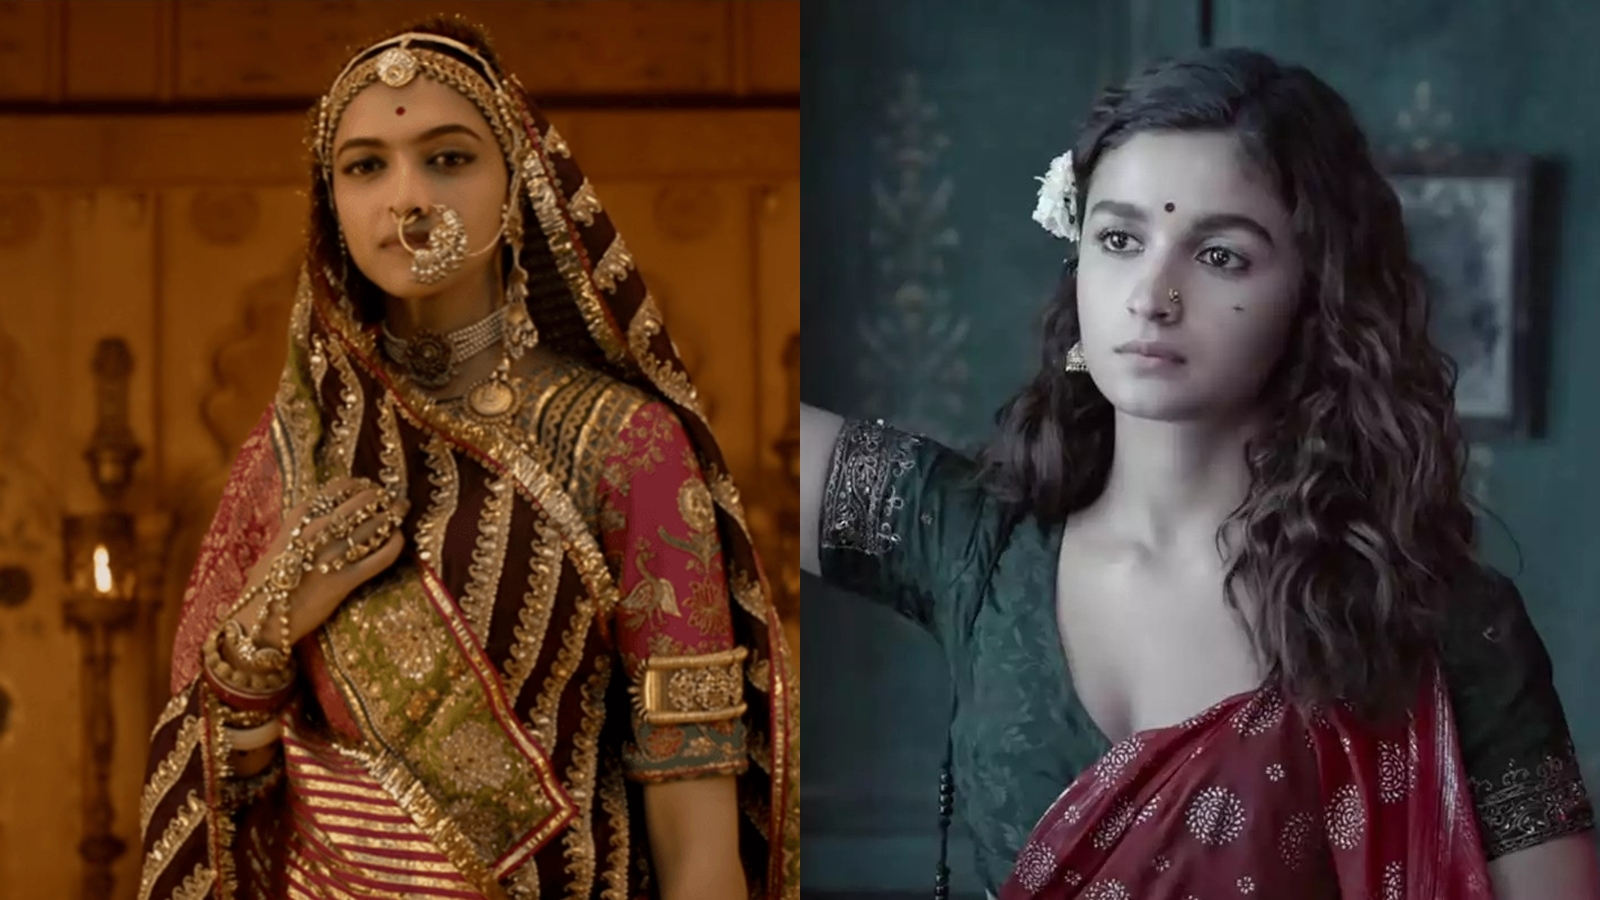 android, fiery, feminine and fully realised: the women in sanjay leela bhansali’s cinema are anything but girls-next-door